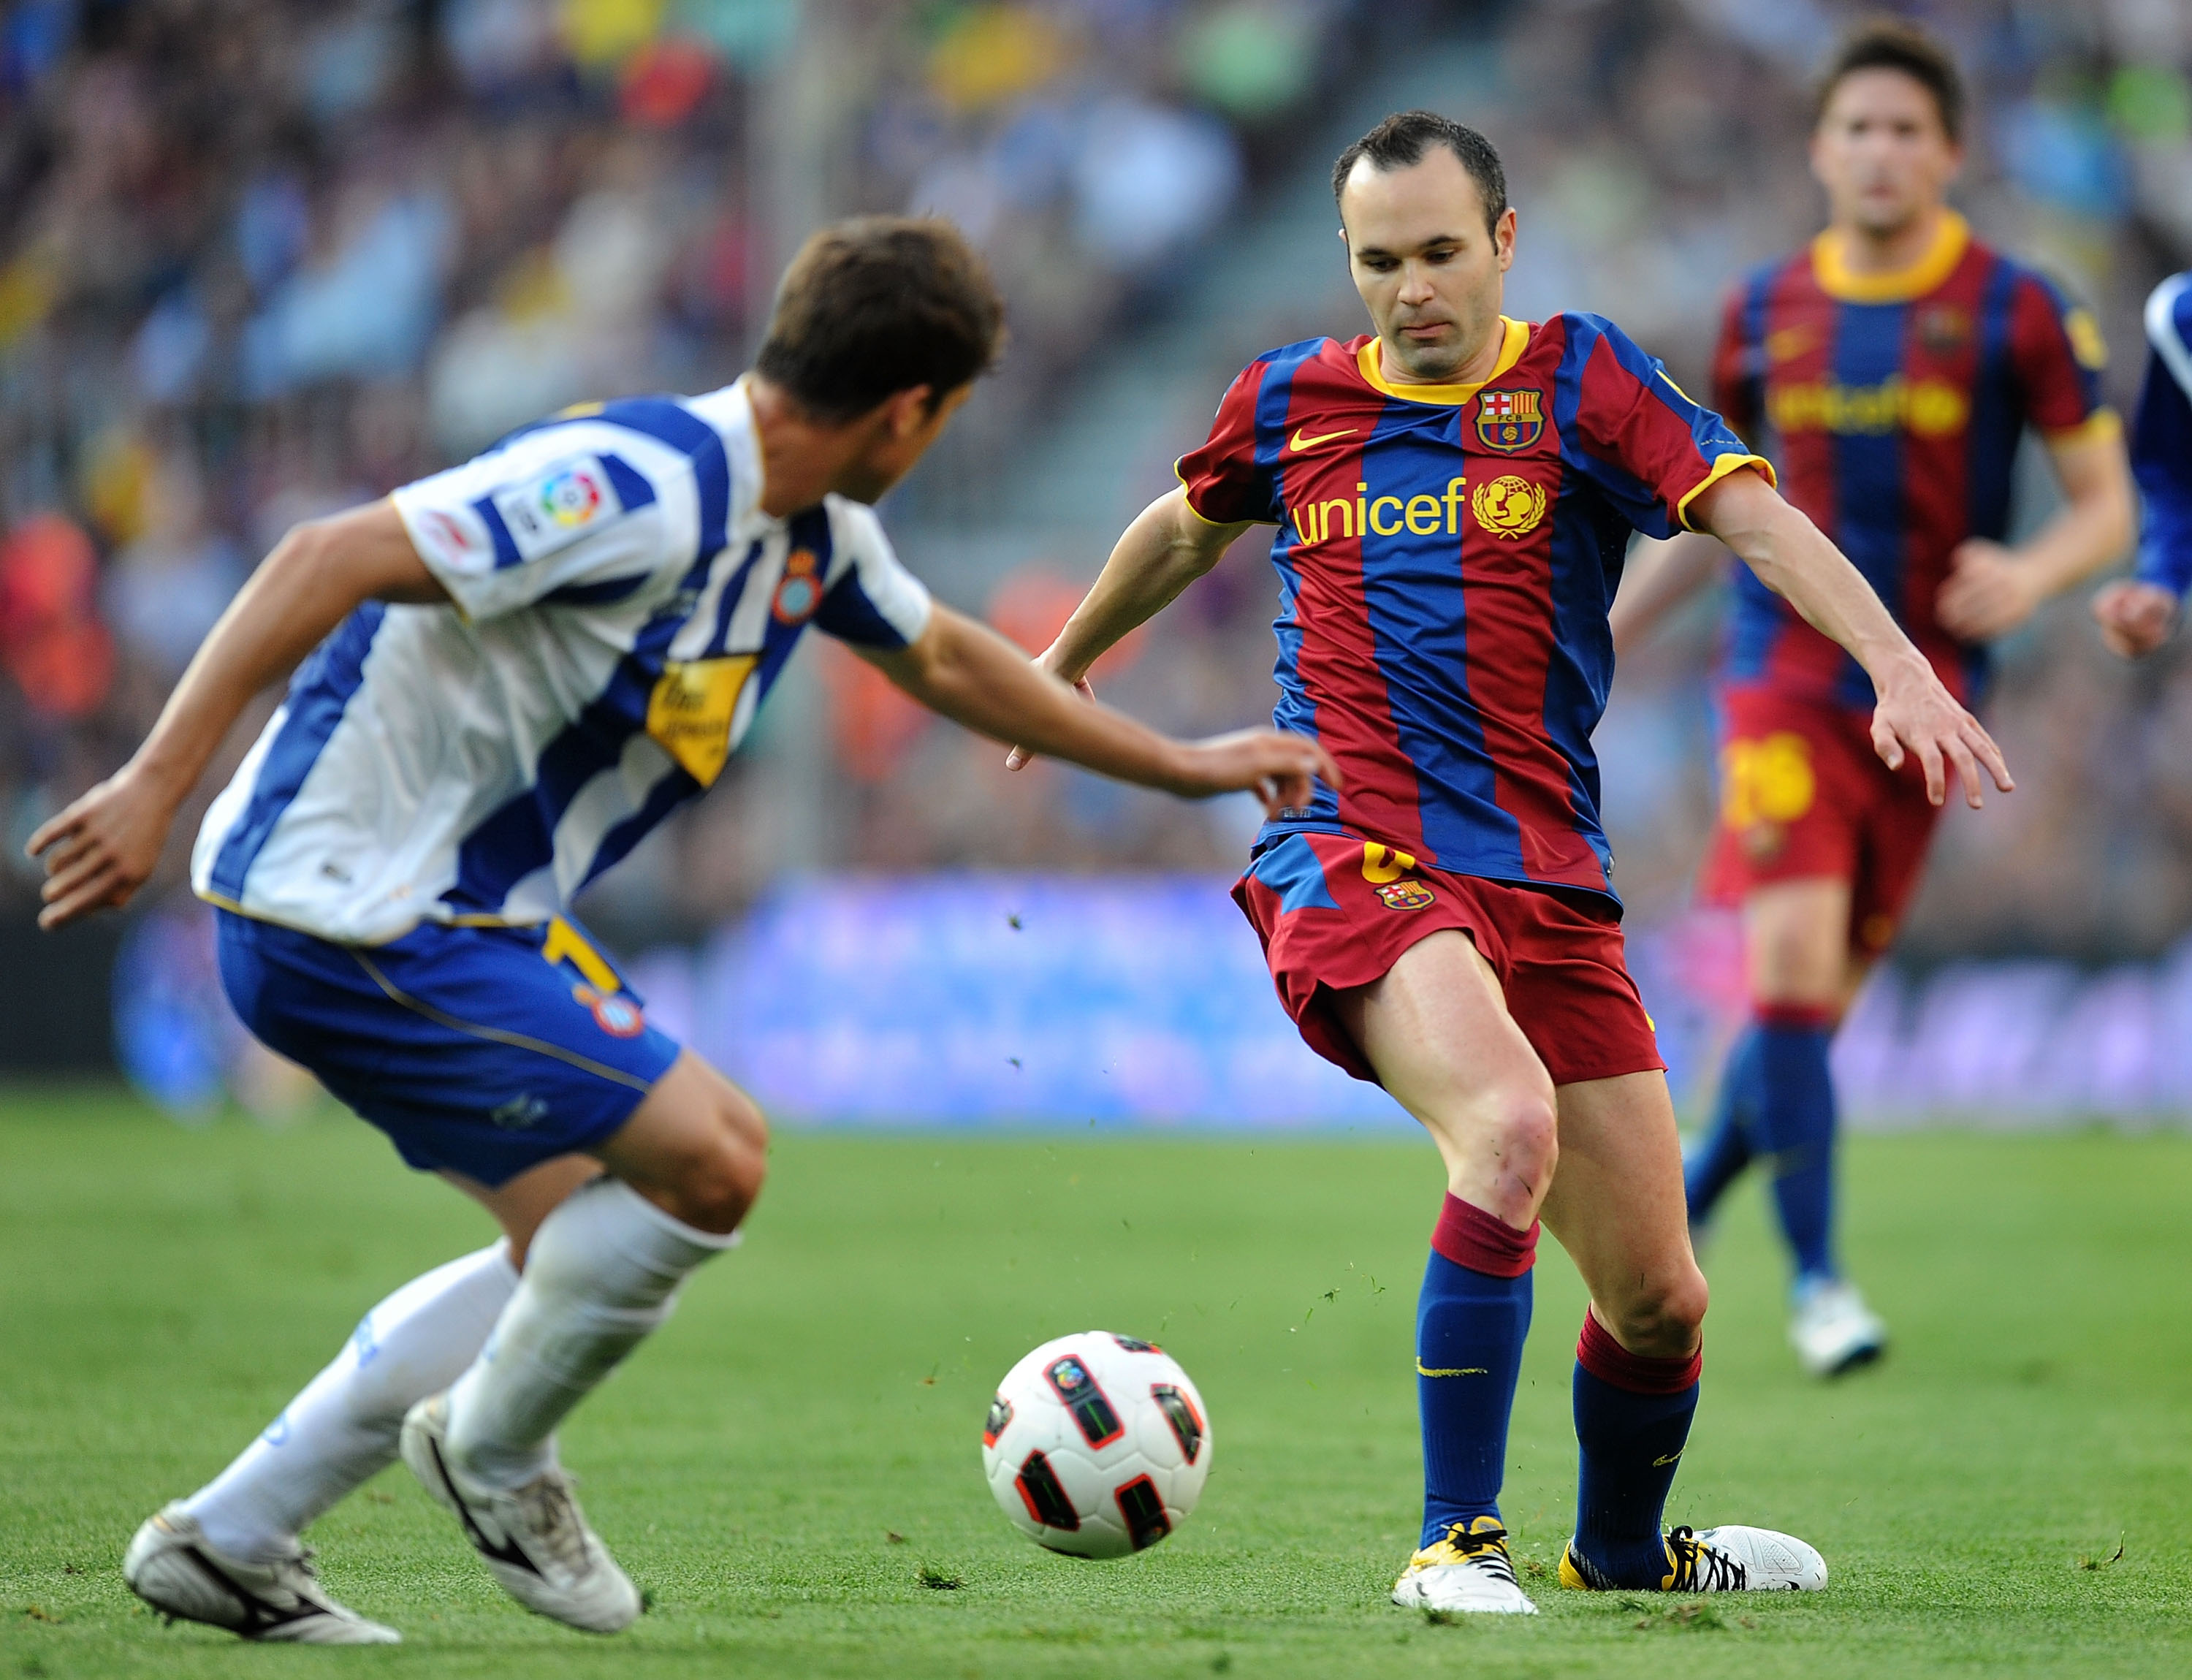 BARCELONA, SPAIN - MAY 08: Andres Iniesta (R) of Barcelona takes on an Espanyol player during the La Liga match between Barcelona and Espanyol at Nou Camp on May 8, 2011 in Barcelona, Spain.  (Photo by Denis Doyle/Getty Images)